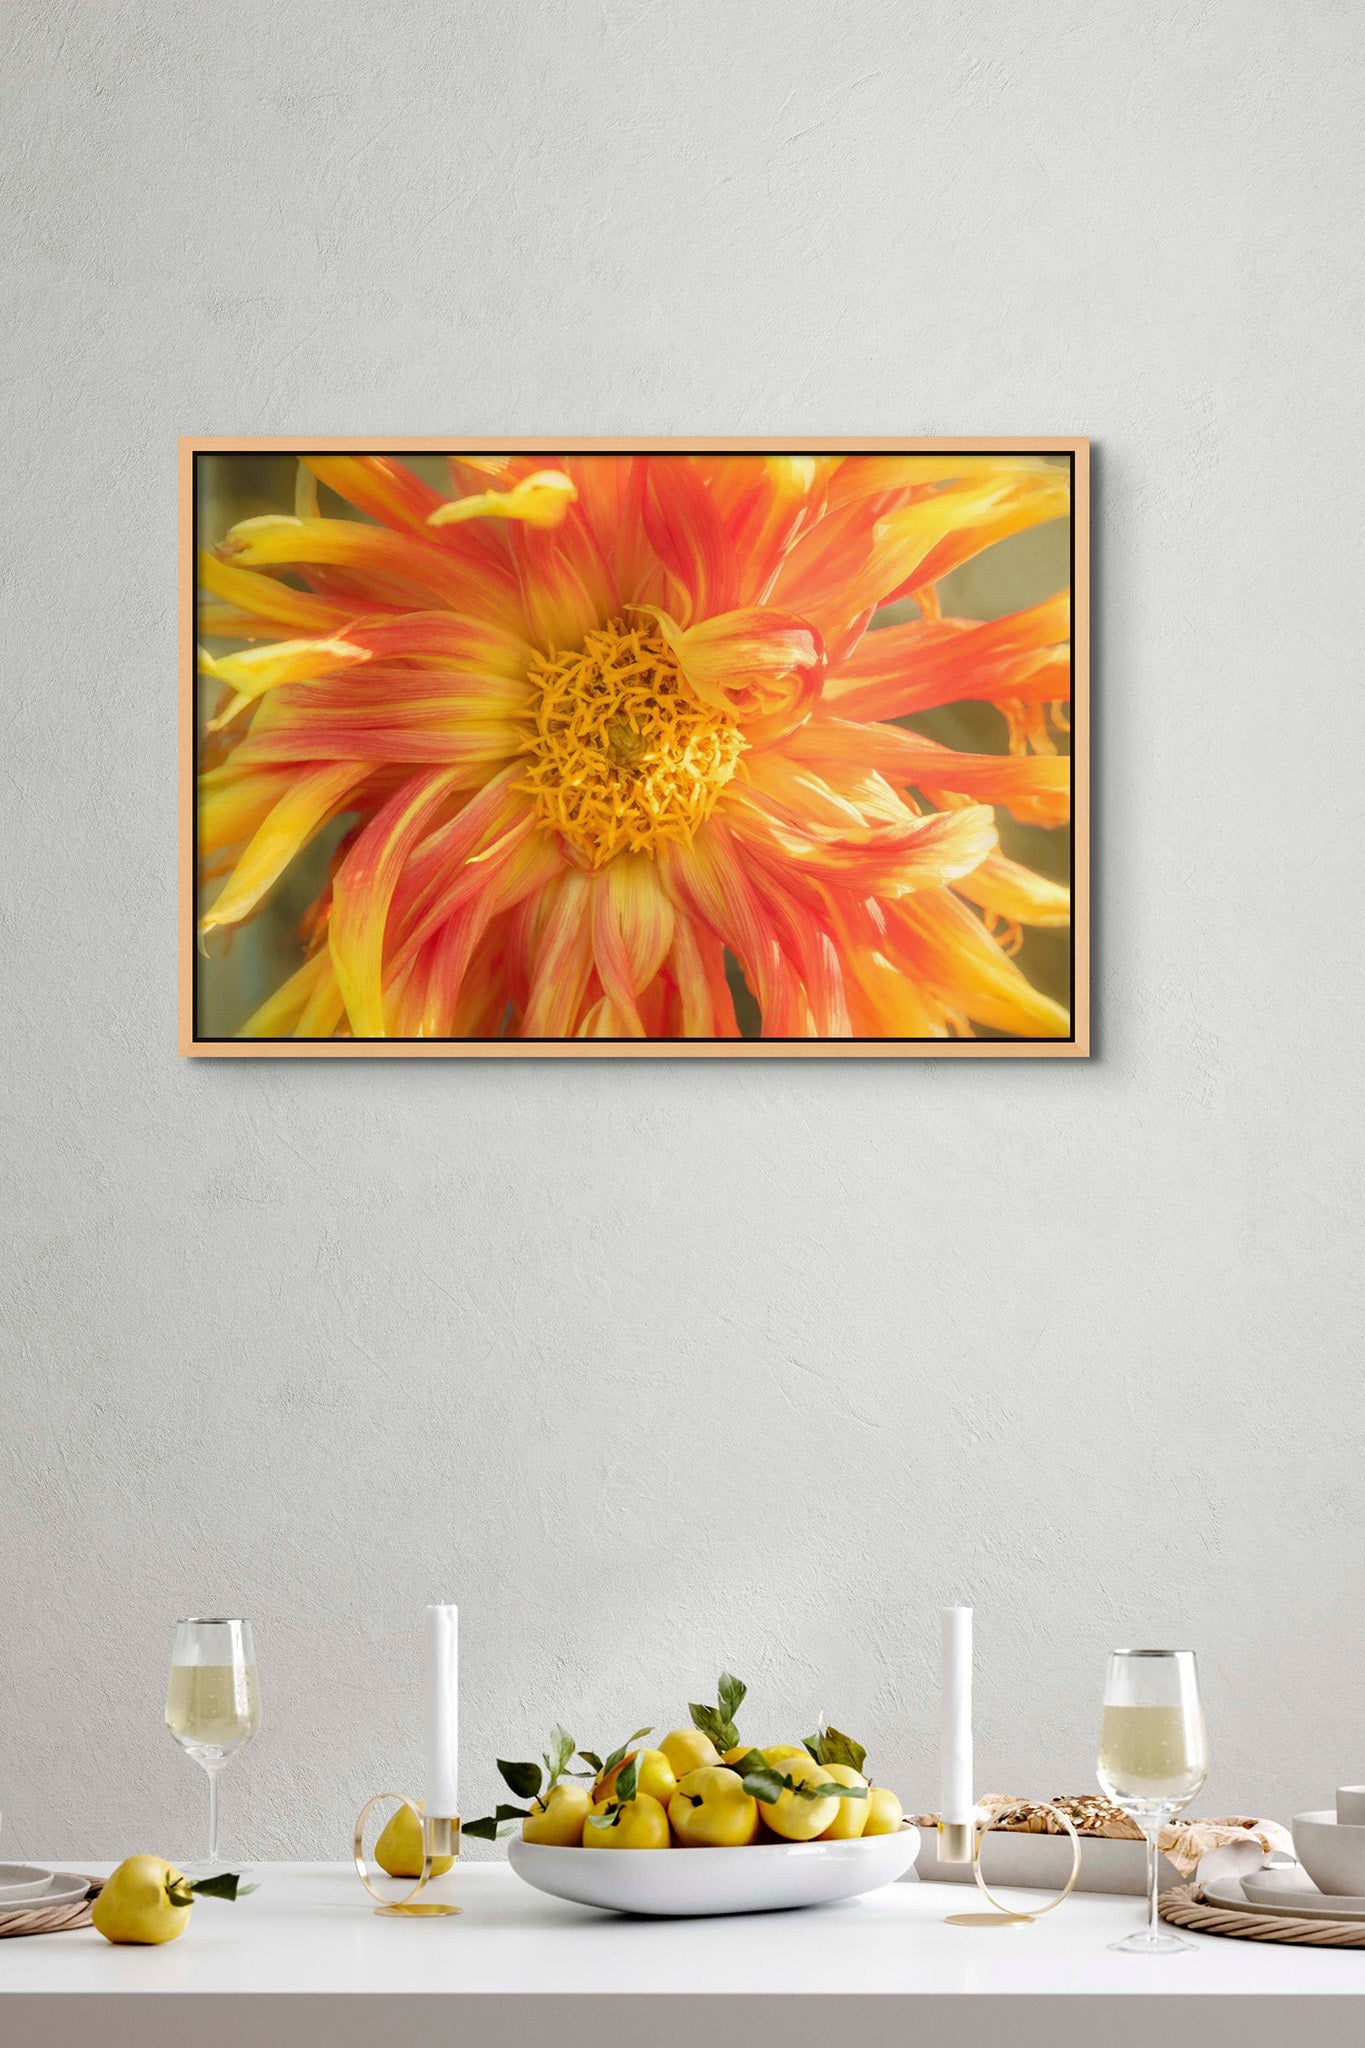 Picture hanging on wall of a dining room with a set table. On the table is glasses of wine and a bowl of lemons. The picture is a photograph of a flowing yellow dahlia flower by Cameron Dreaux. 